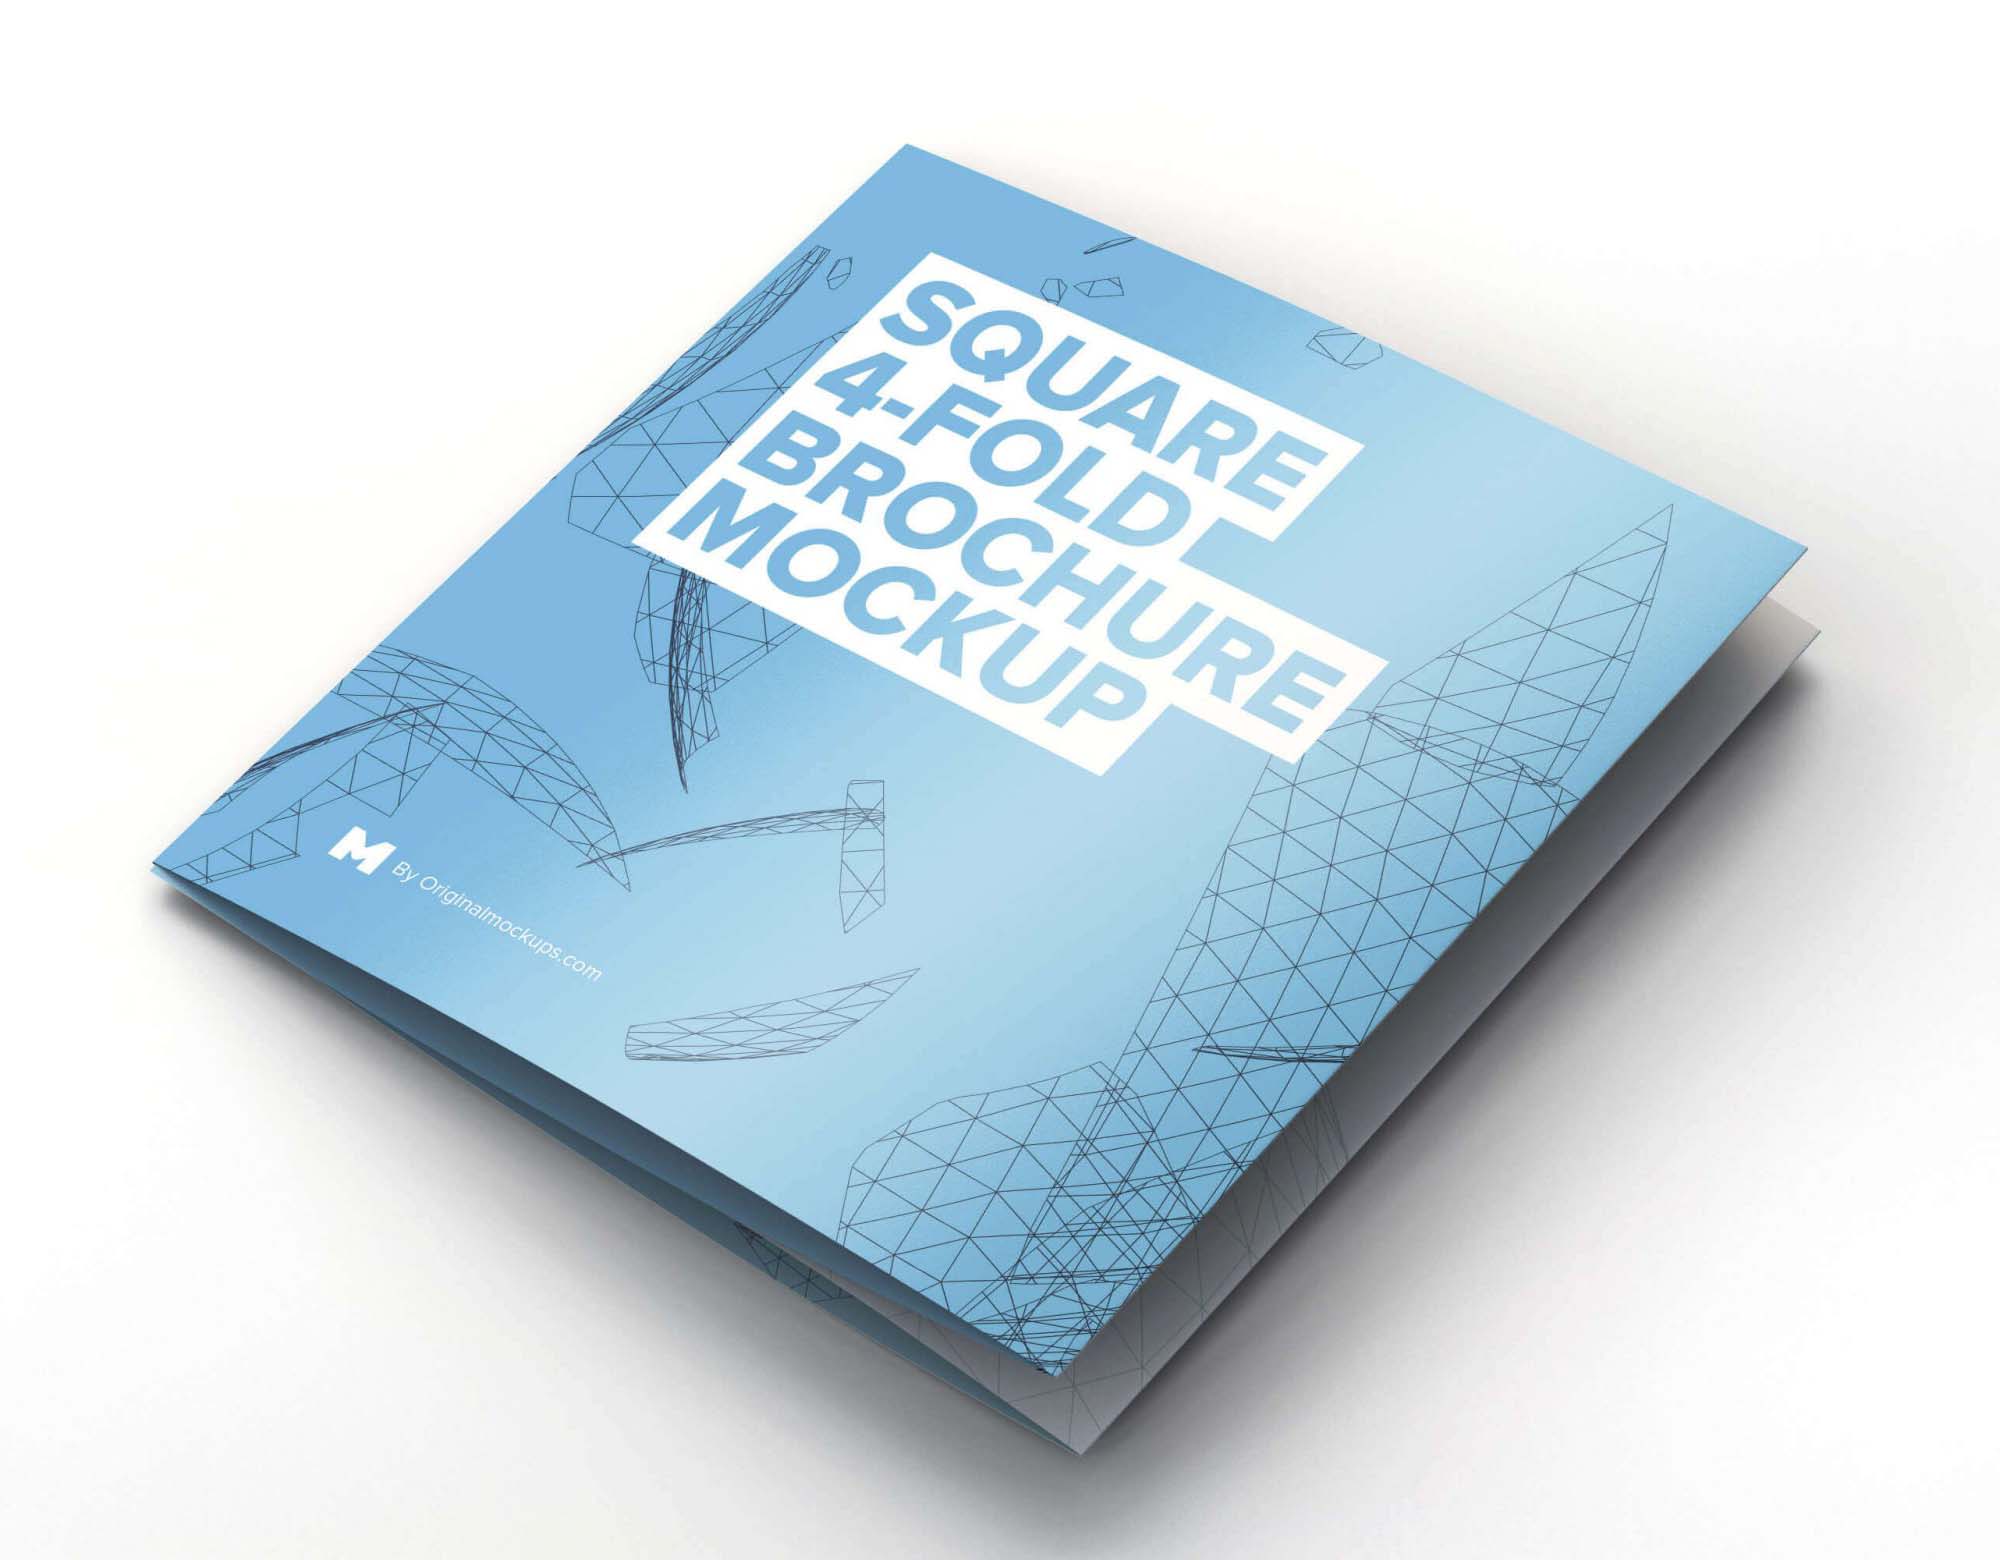 Typical Square 4 Fold Brochure Mockup